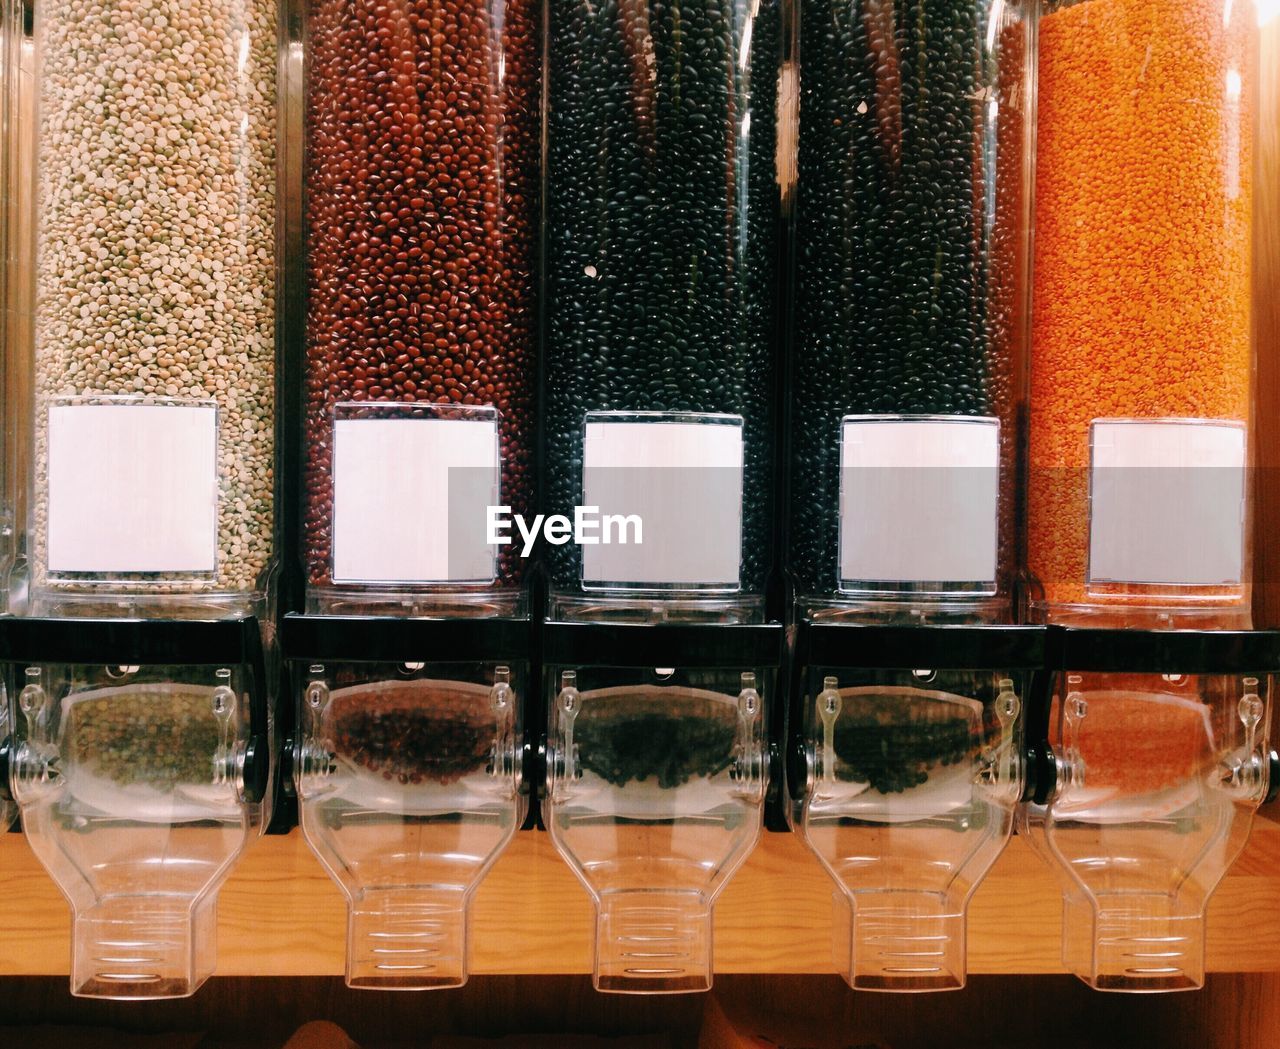 Various lentils in containers at store